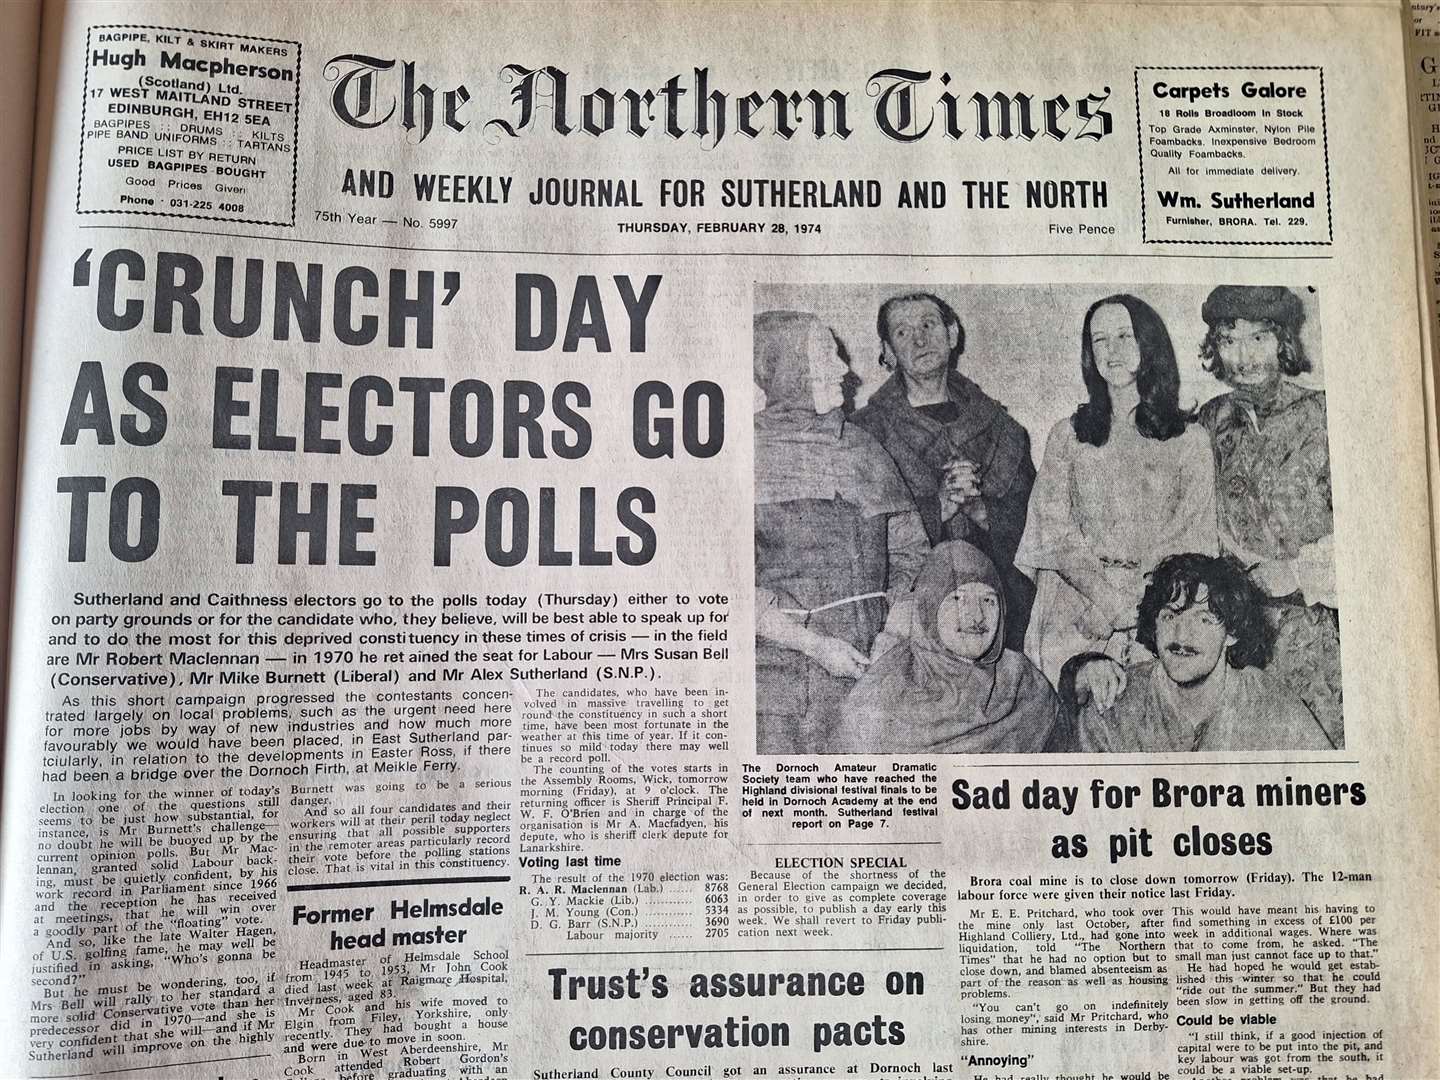 The edition of February 28, 1974.